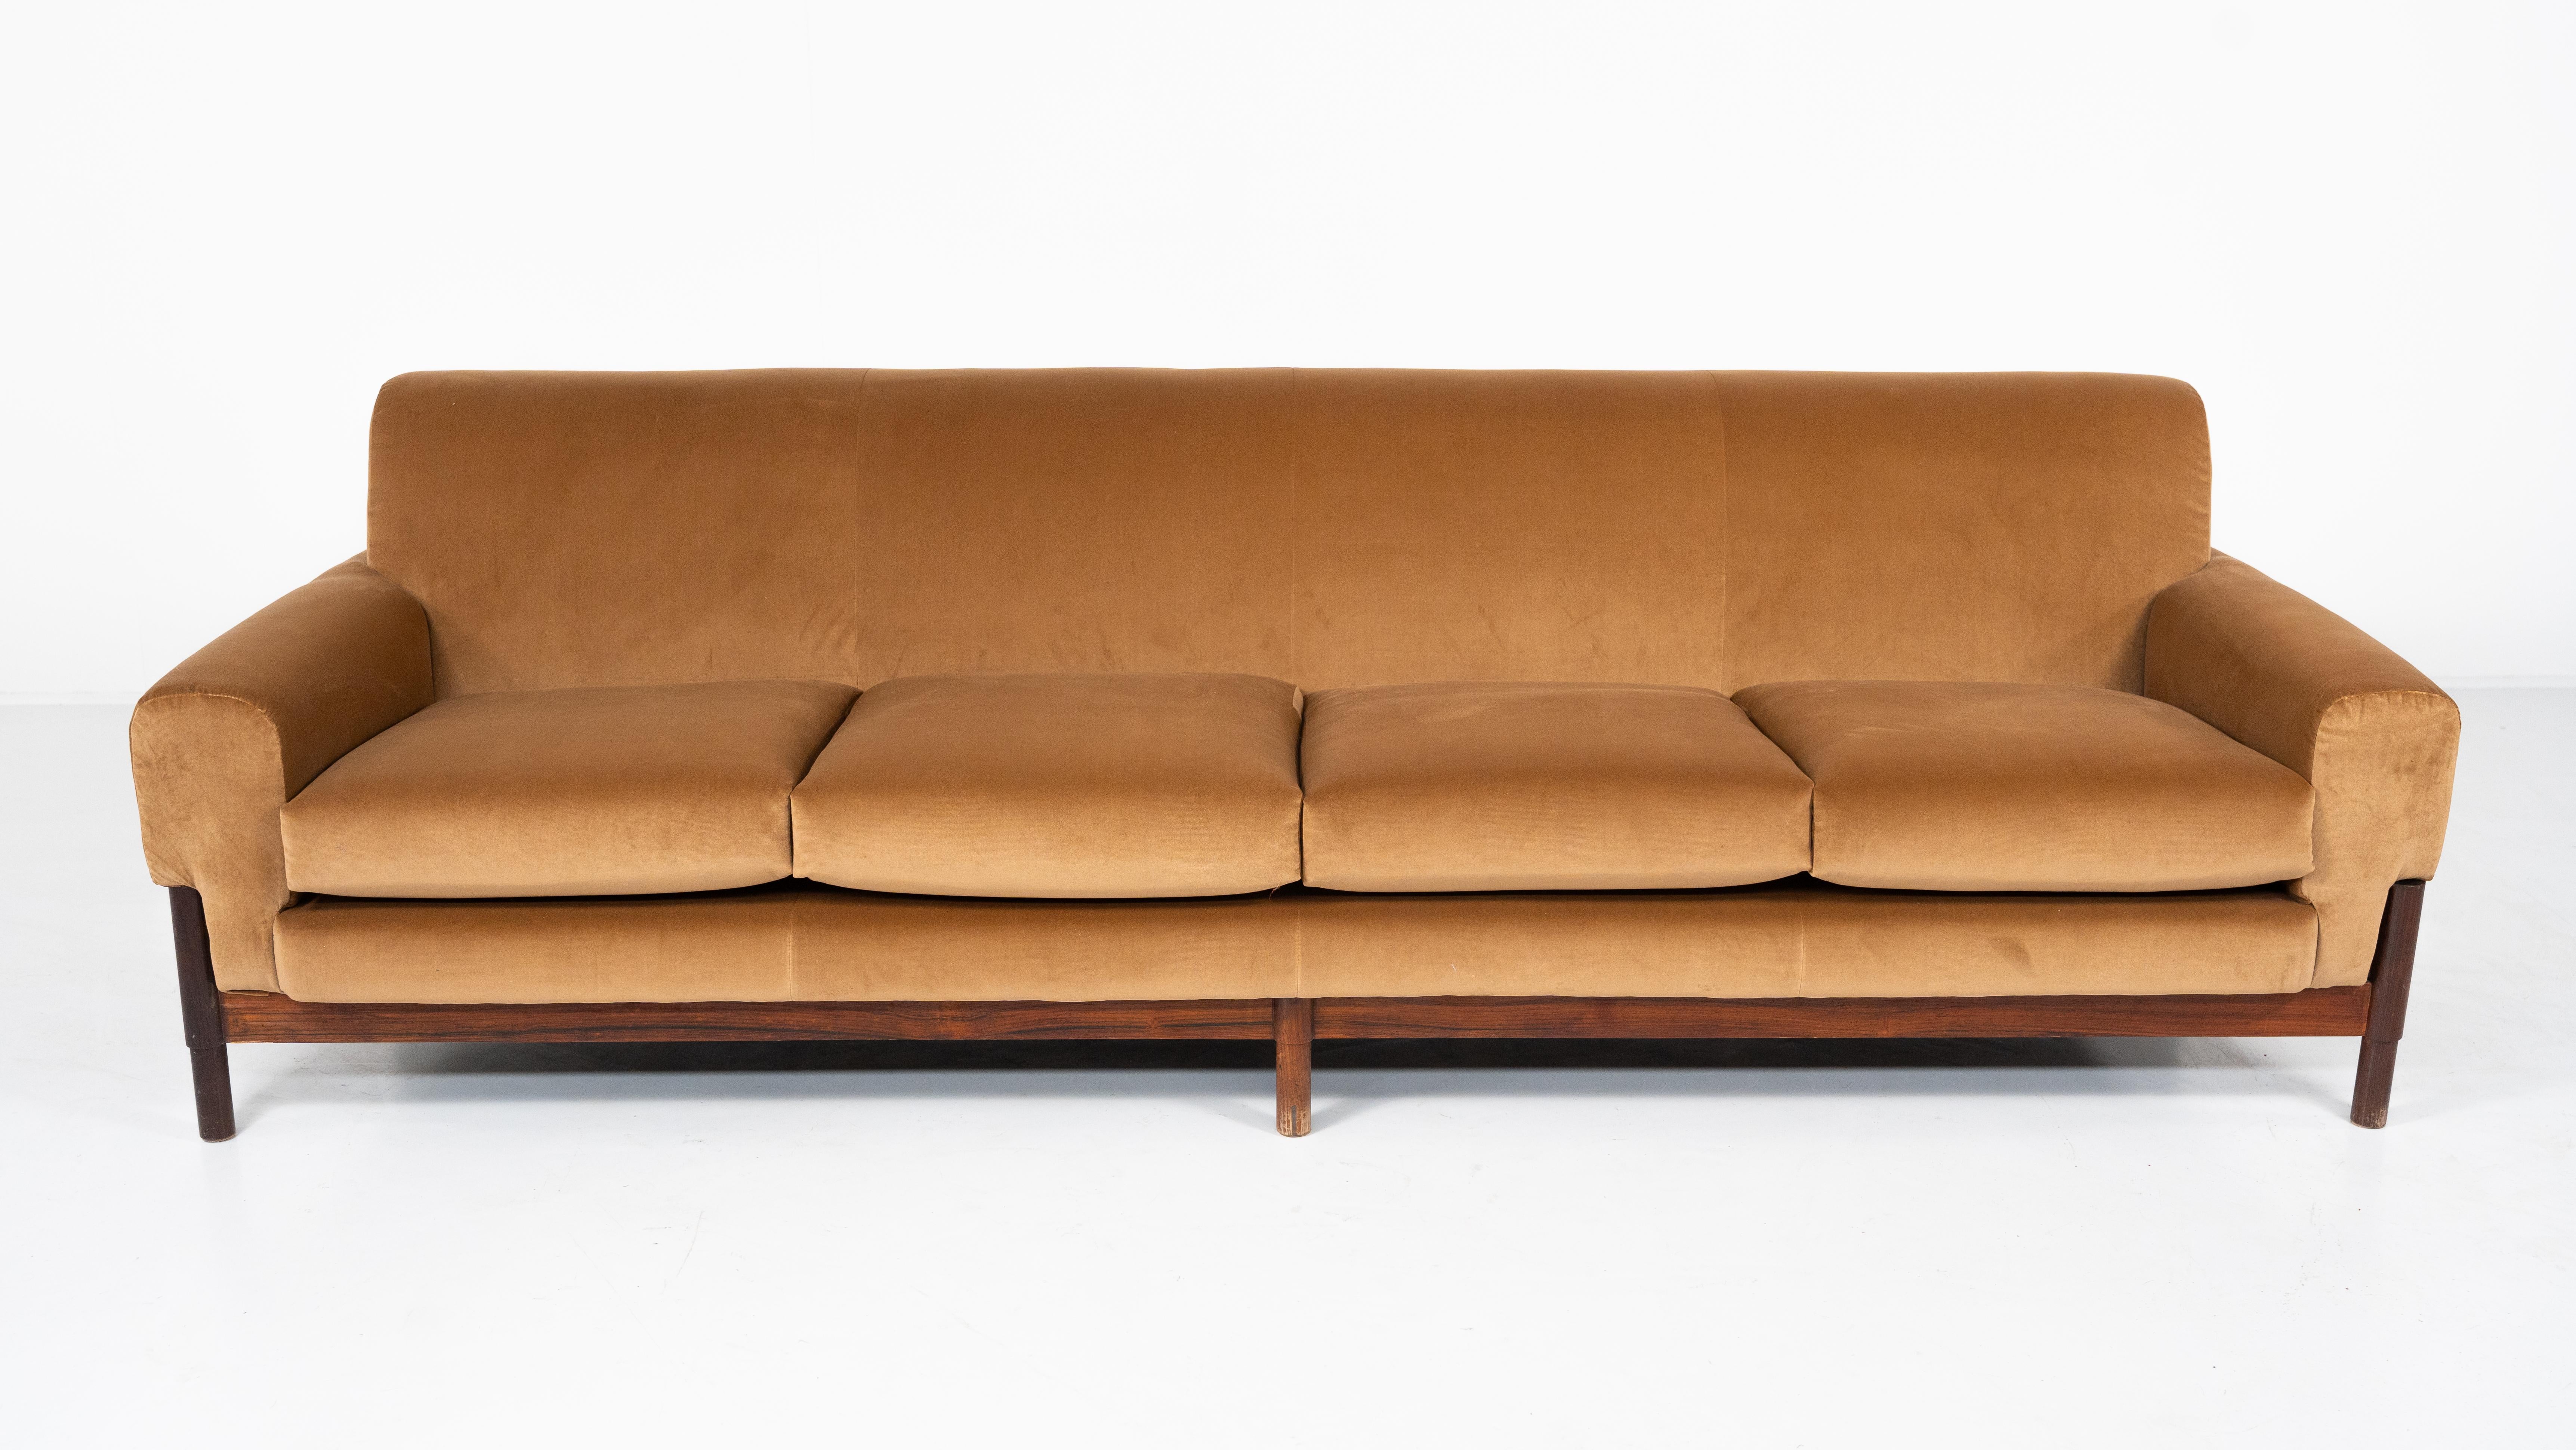 Mid-Century Modern Mid-Century Four Seater Sofa by Saporiti, Italy, 1960s - New Upholstery For Sale